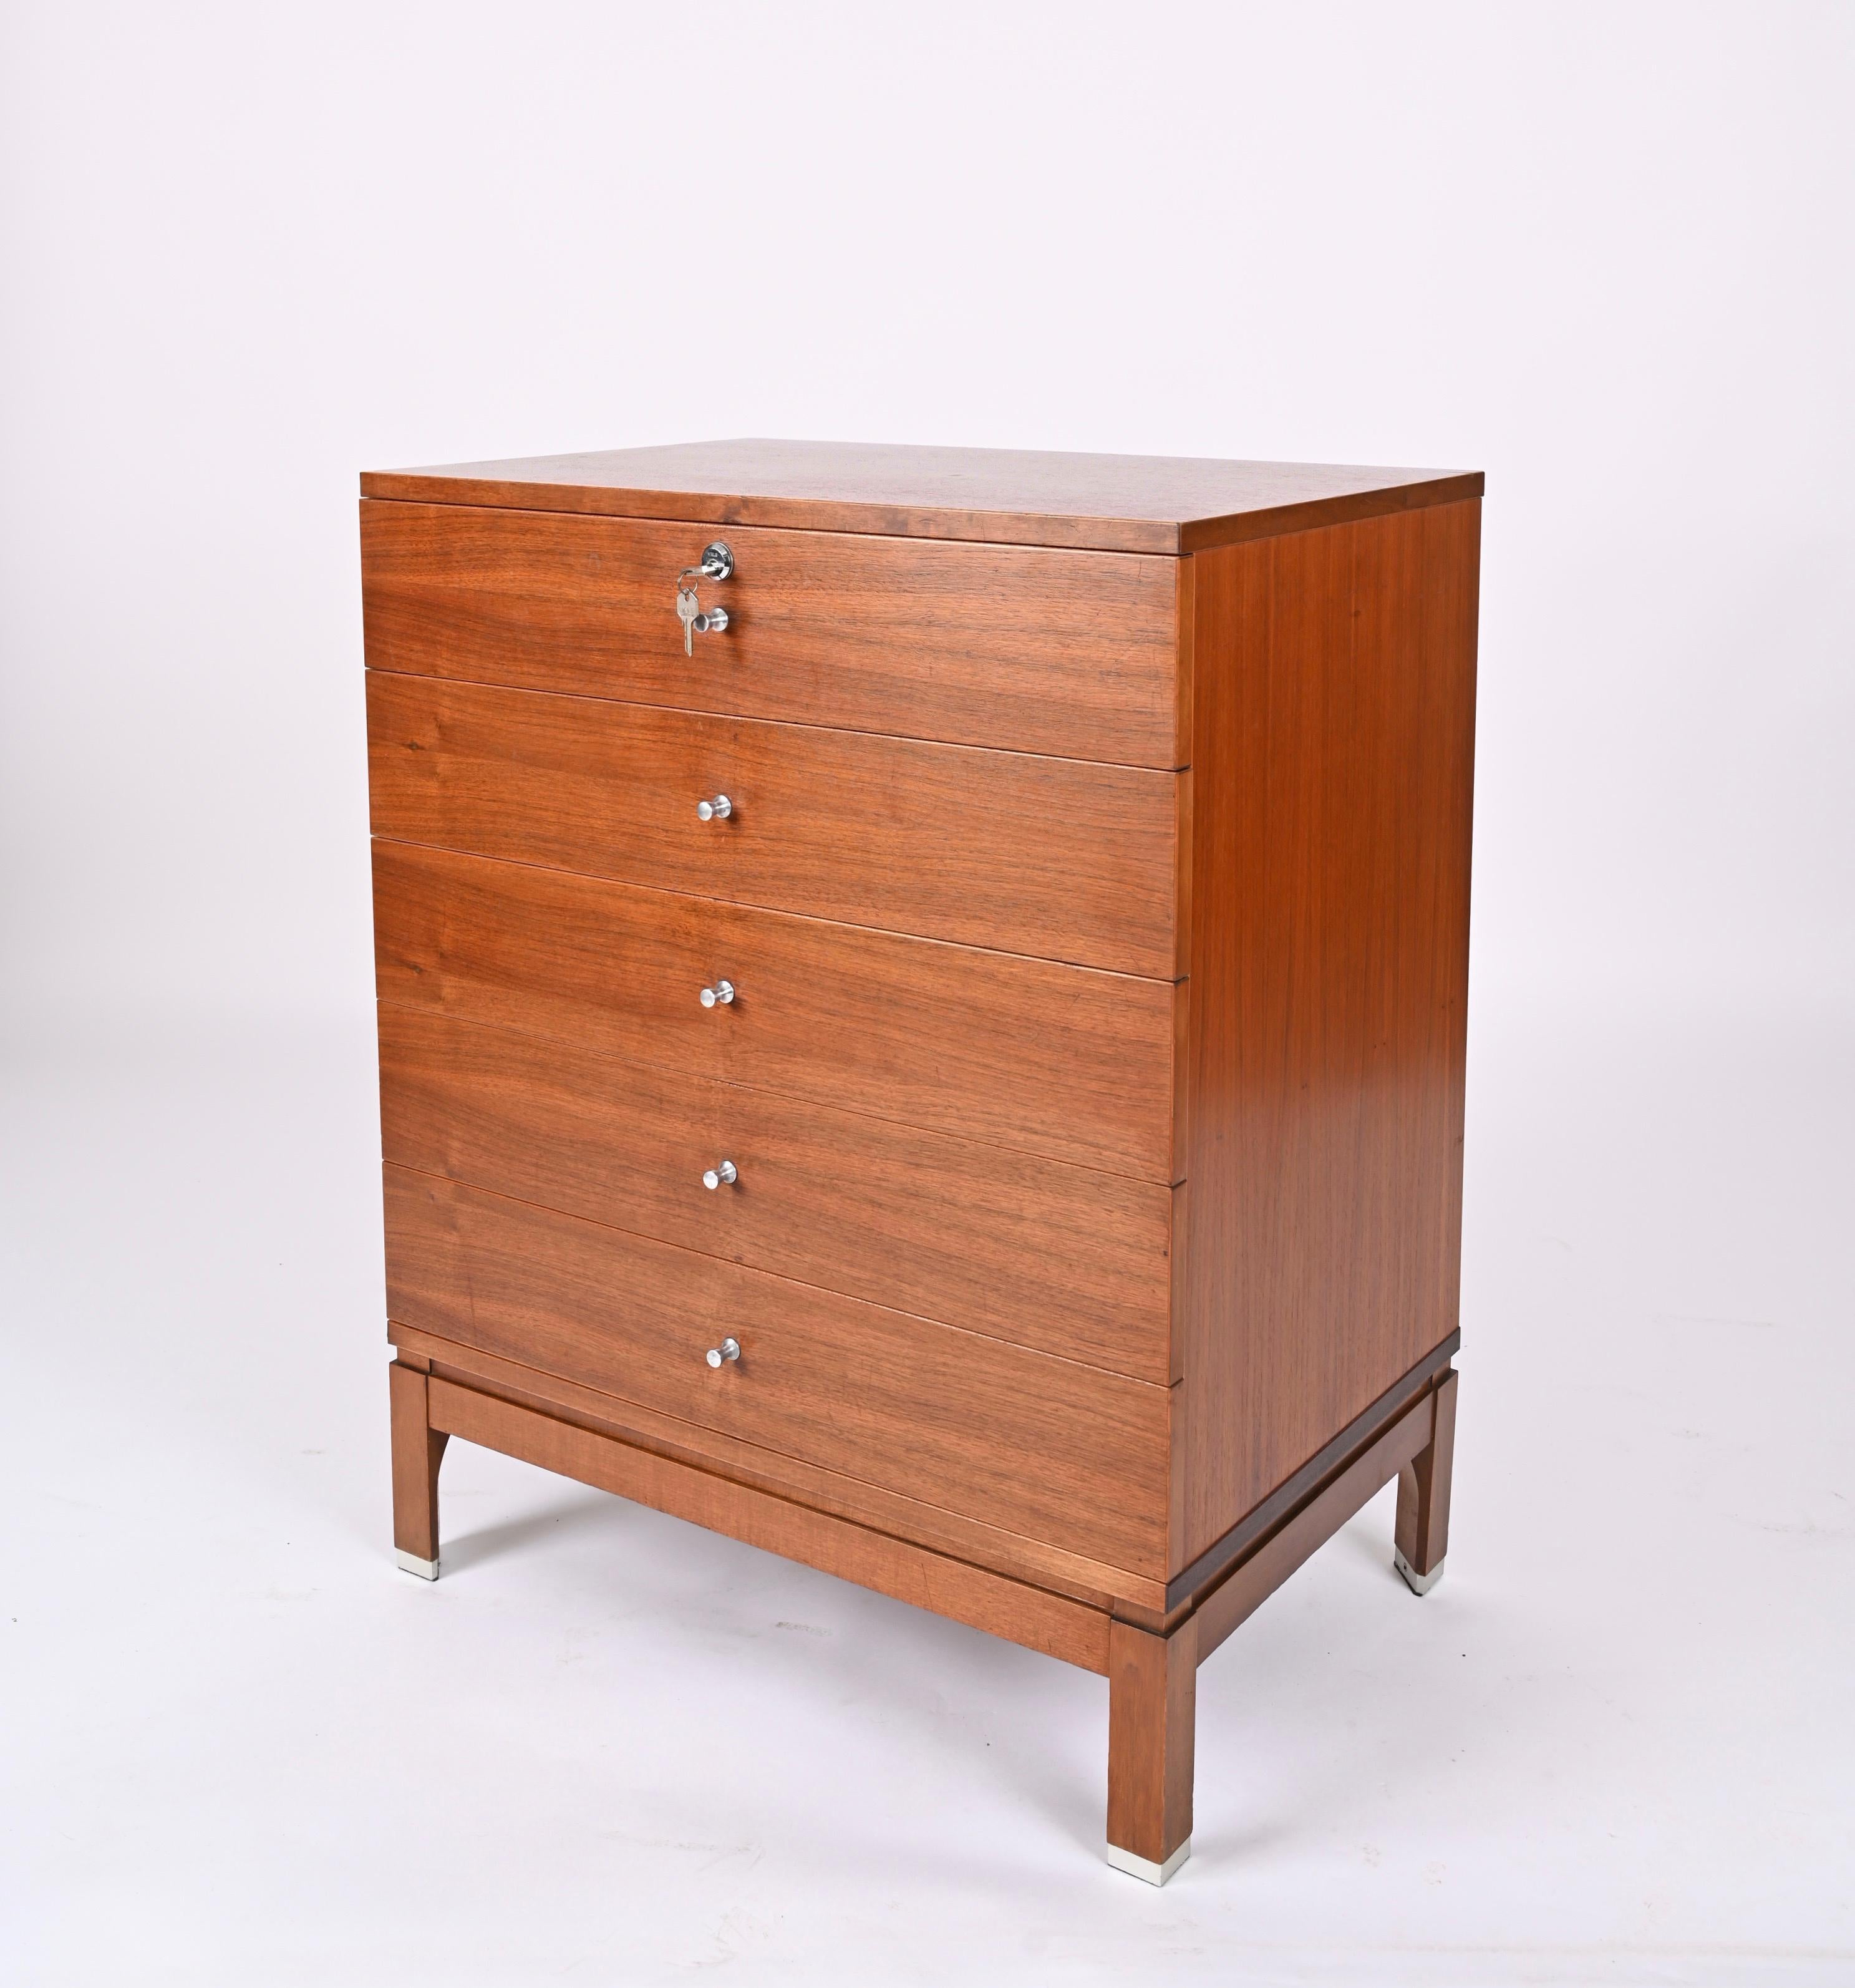 Mid-Century Chest of Drawers in Walnut by Ico Parisi for MIM Roma, Italy 1960s For Sale 4